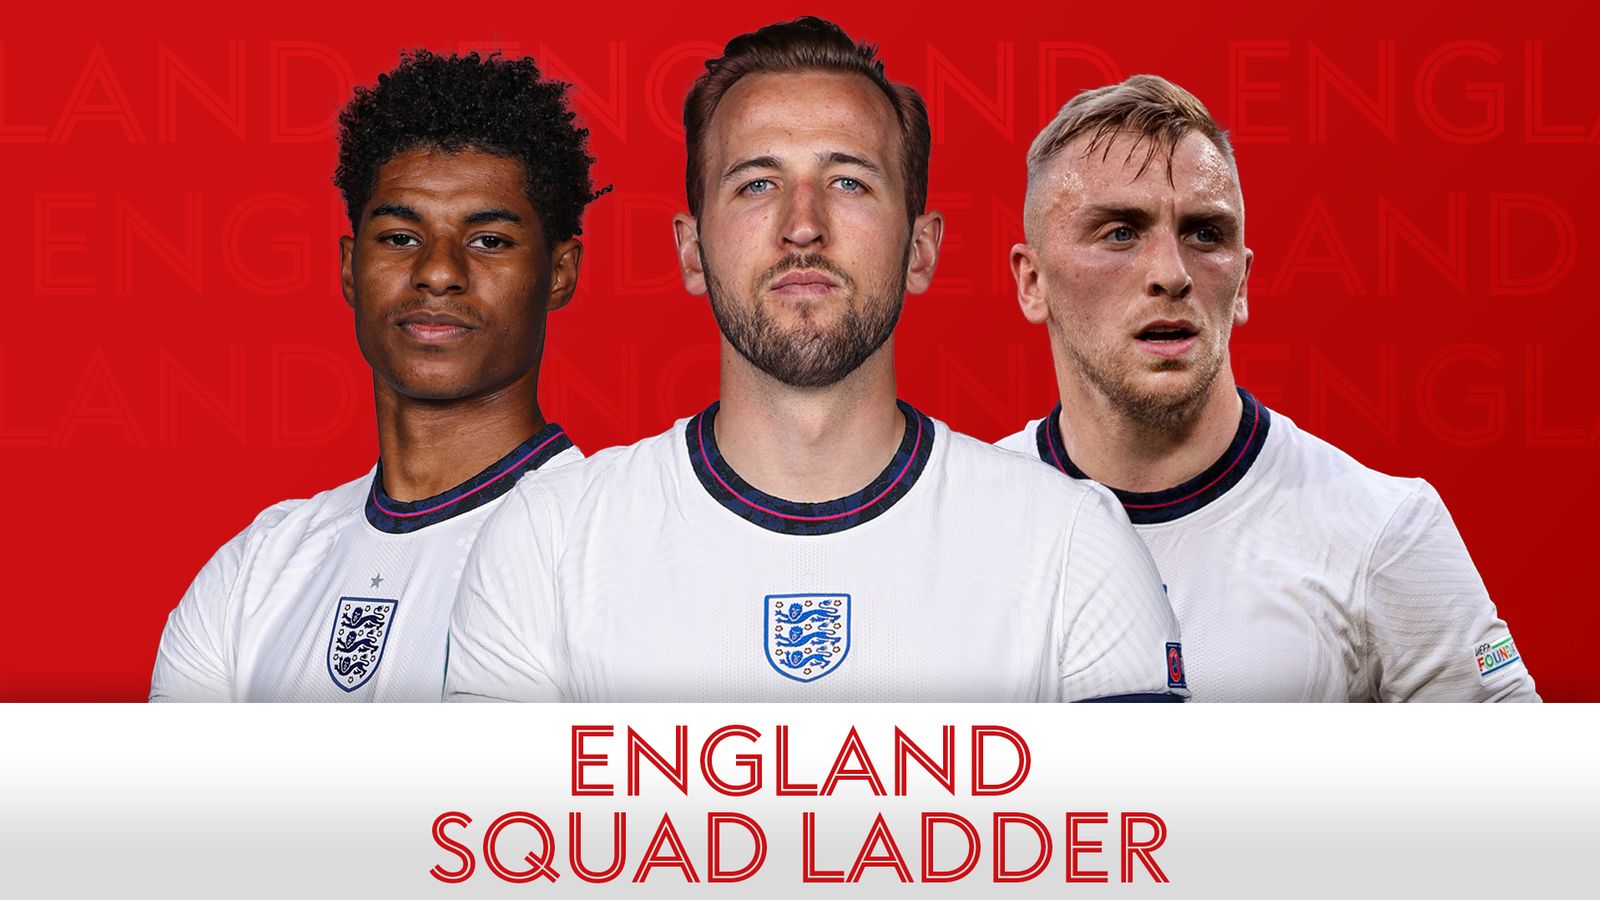 harry-maguire-looks-a-shoo-in-for-gareth-southgate-but-ivan-toney-must-seize-his-chance-england-world-cup-squad-ladder